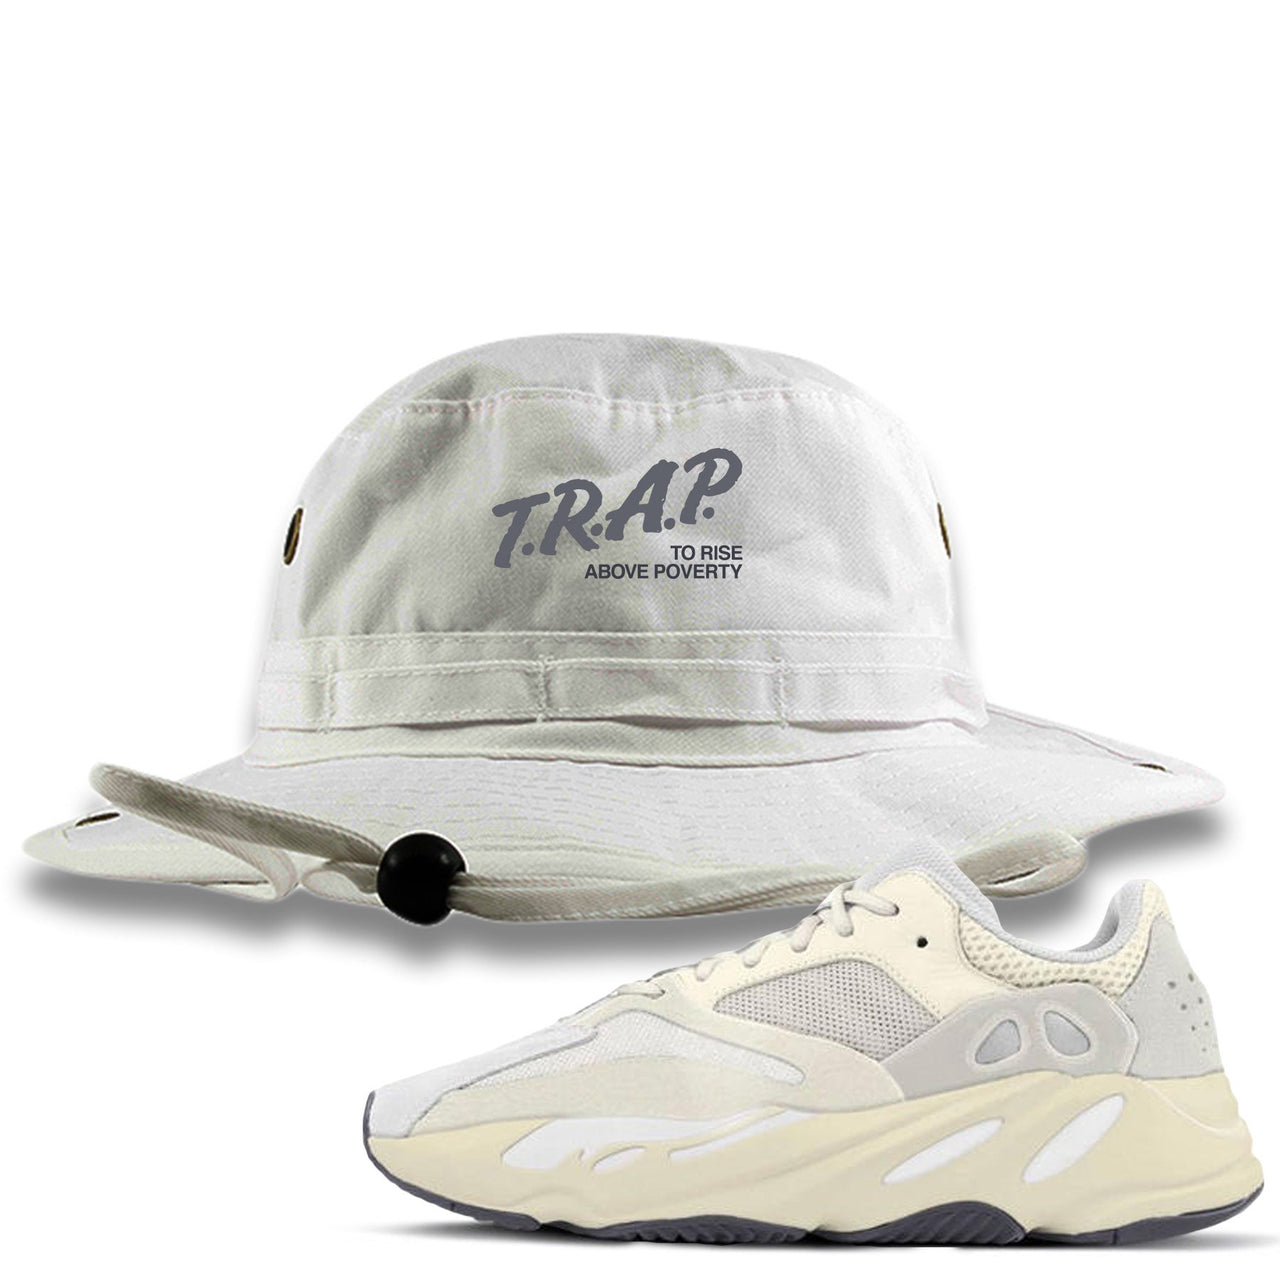 Analog 700s Bucket Hat | Trap Rise Above Poverty, White